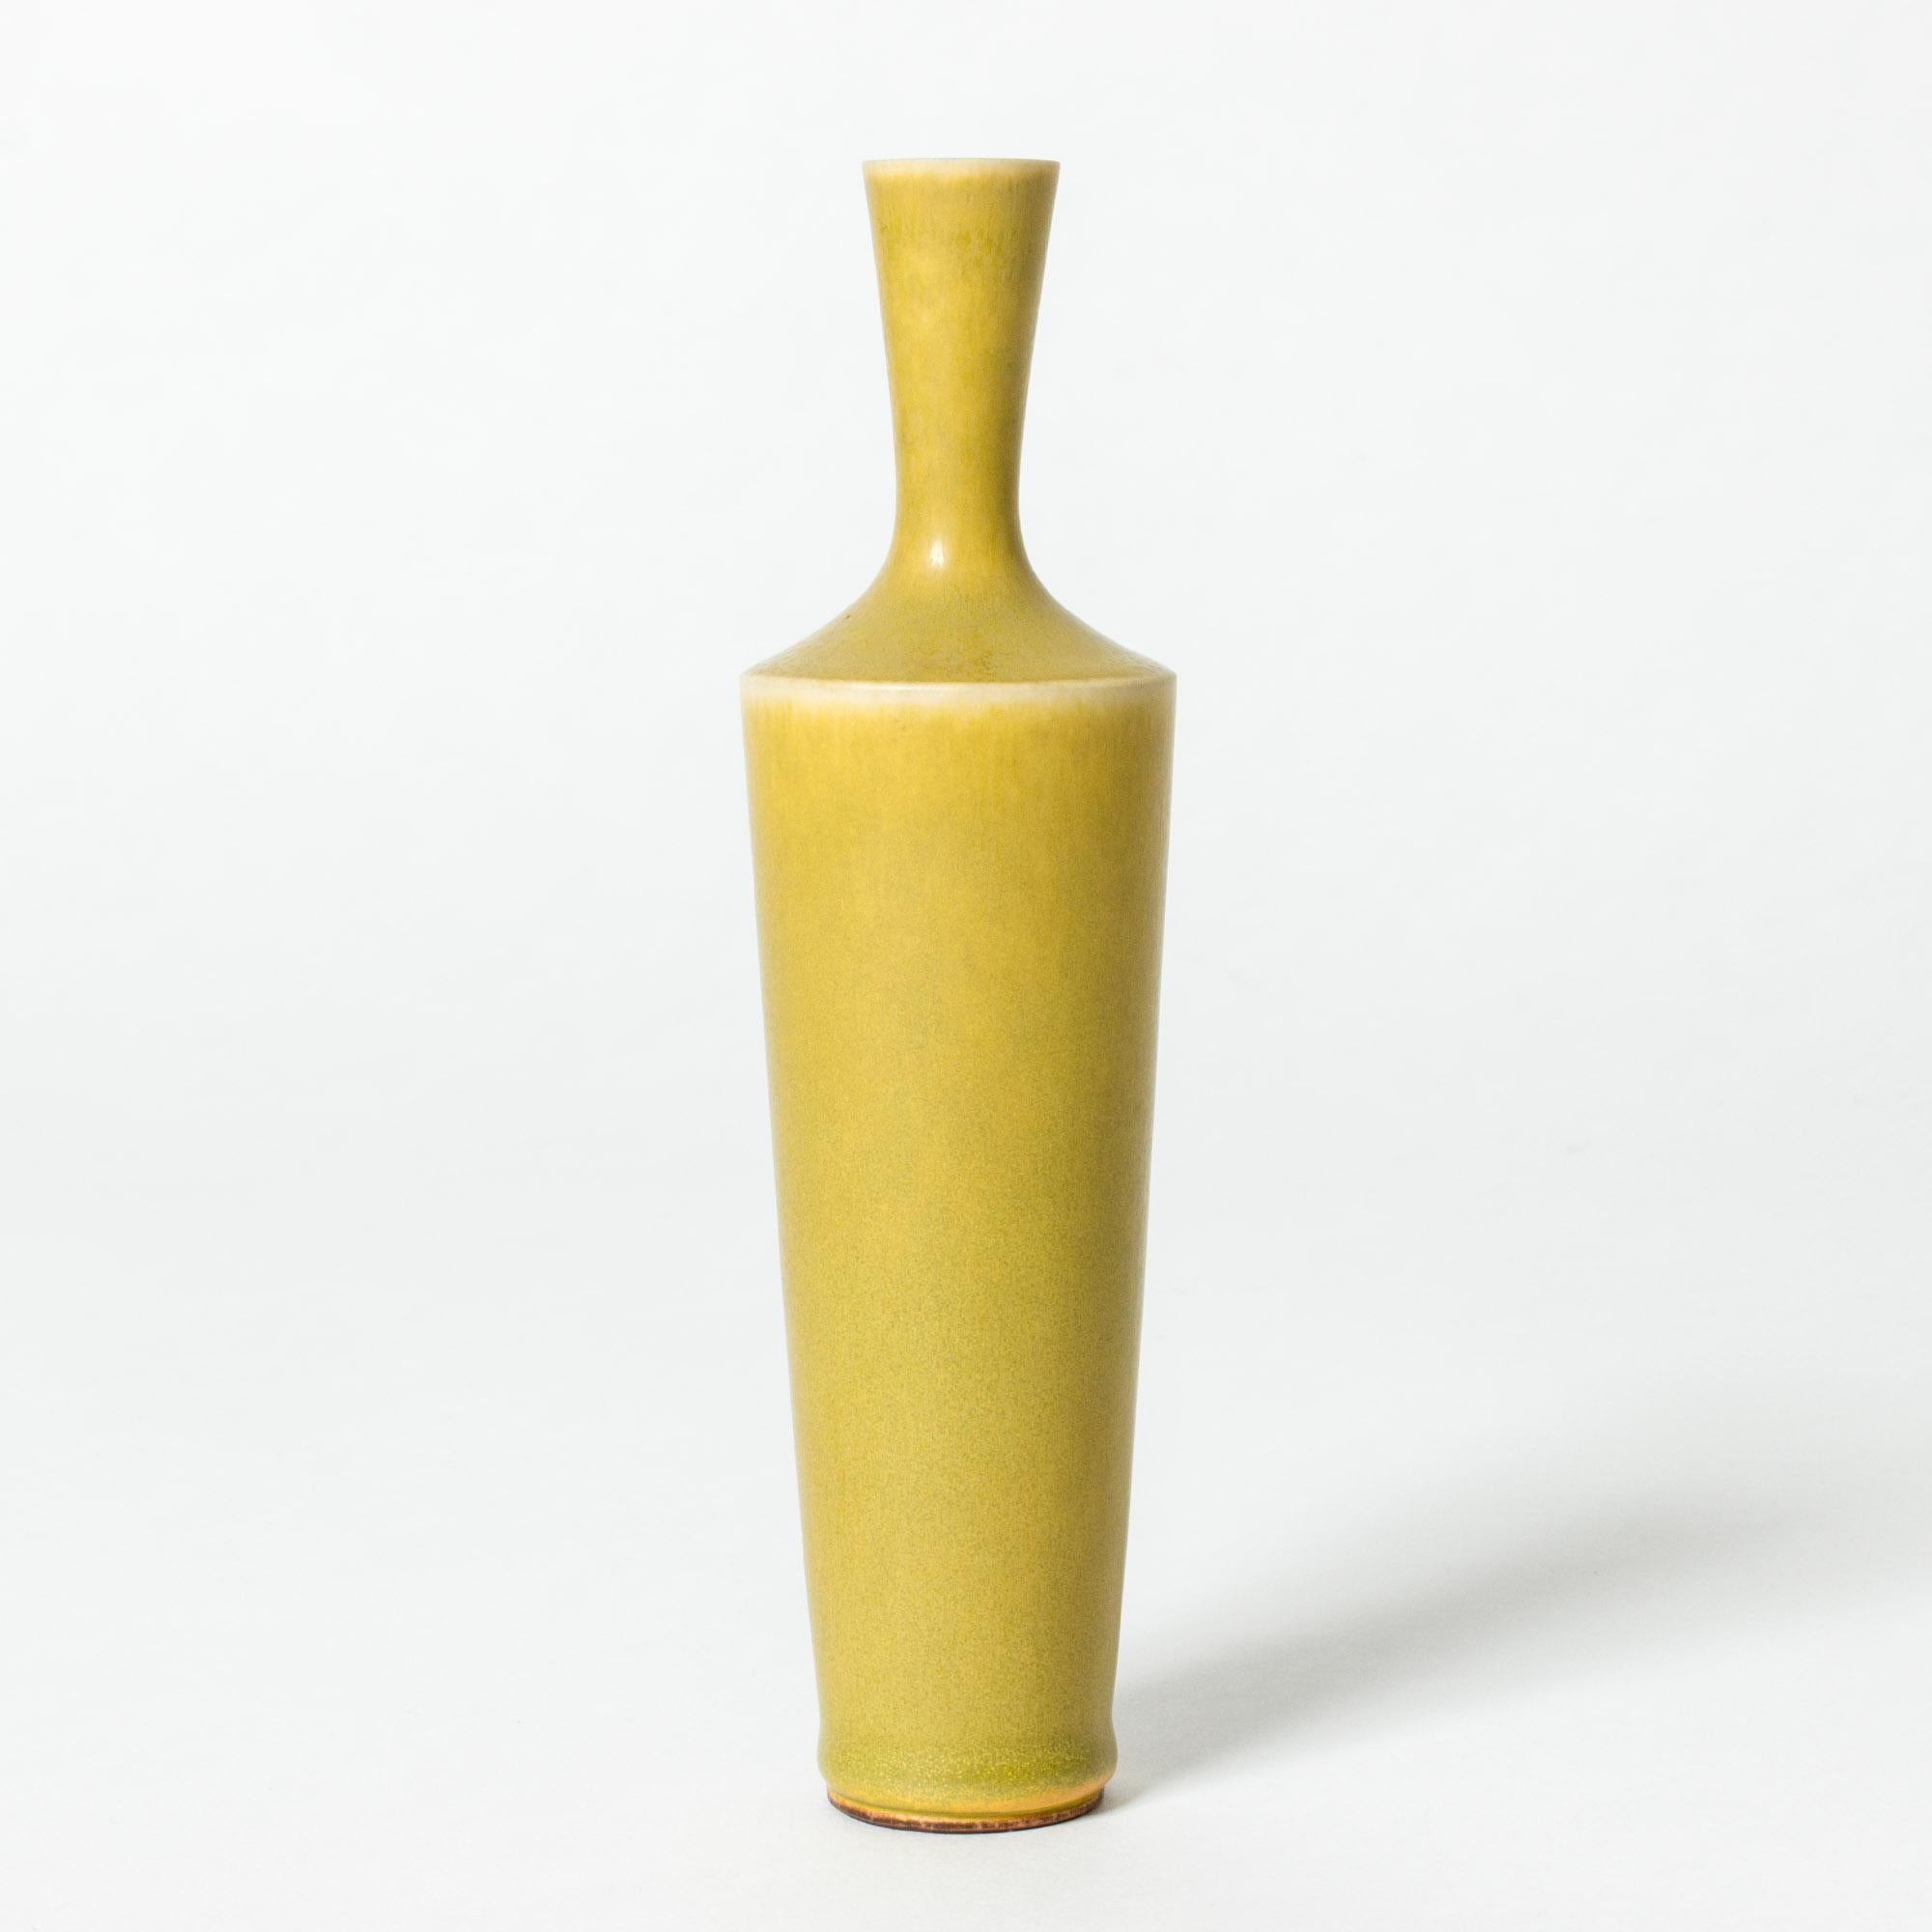 Stoneware vase by Berndt Friberg in an elegant, statuesque form. Intense yellow hare’s fur glaze.

Berndt Friberg was a Swedish ceramicist, renowned for his stoneware vases and vessels for Gustavsberg. His pure, composed designs with satiny,